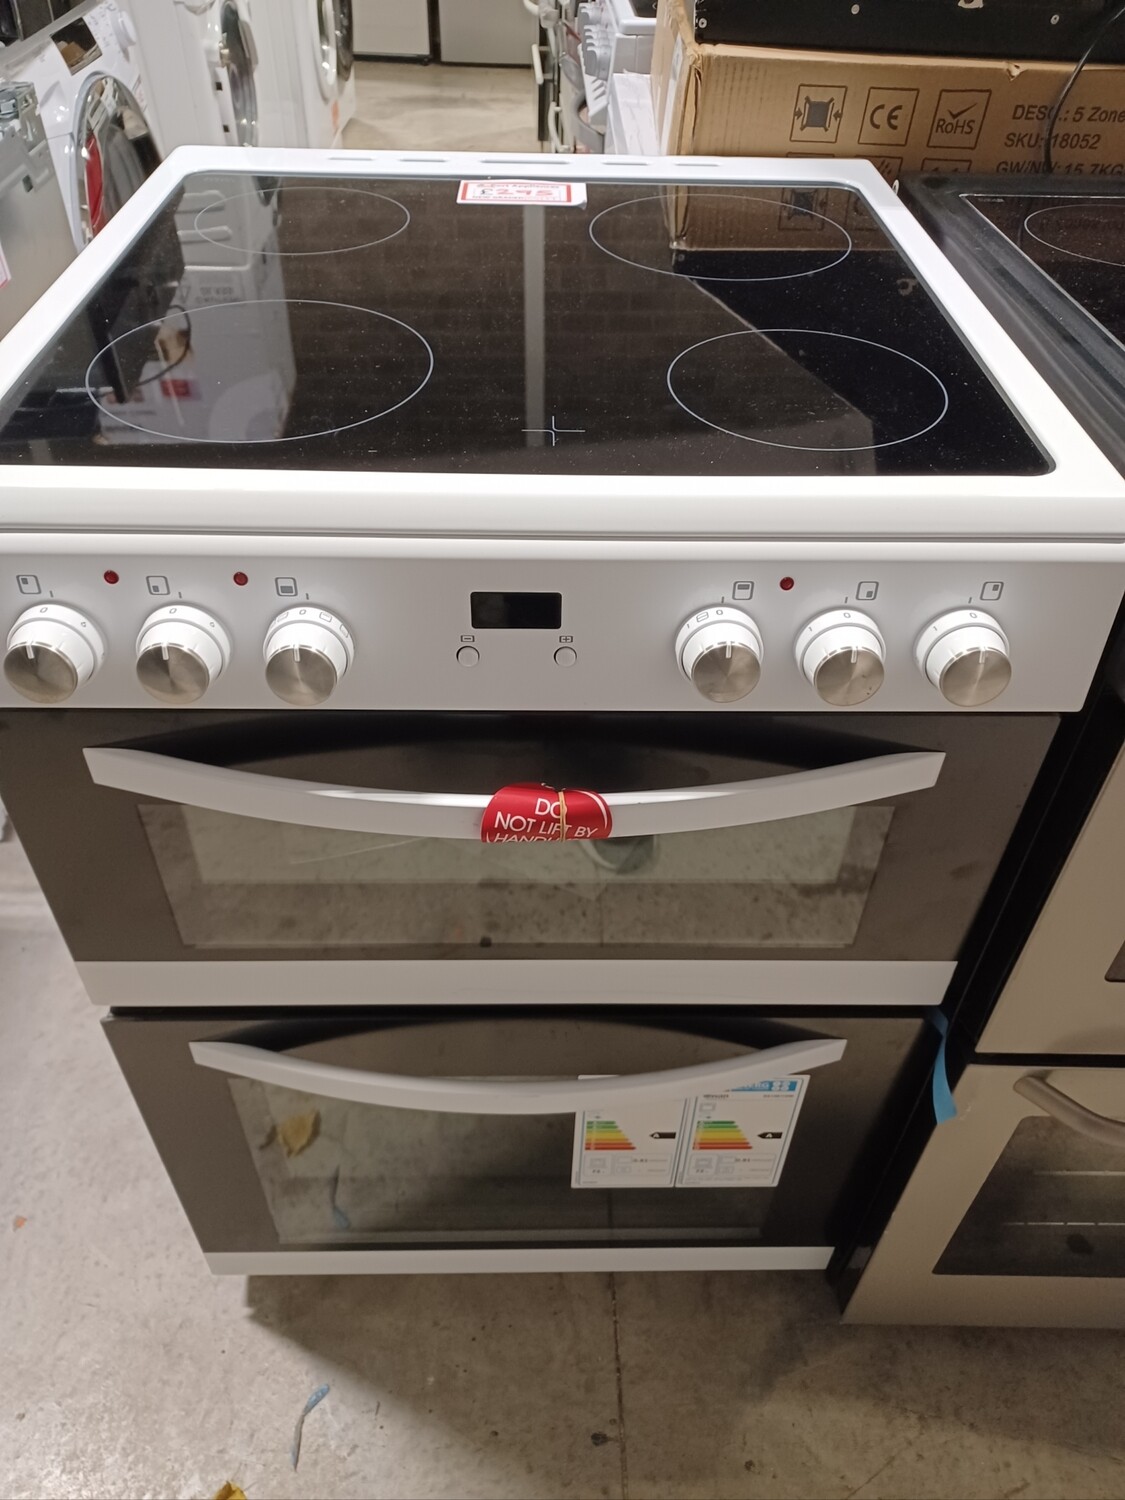 Swan SX158110W 60cm Electric Cooker New Graded 12 month guarantee